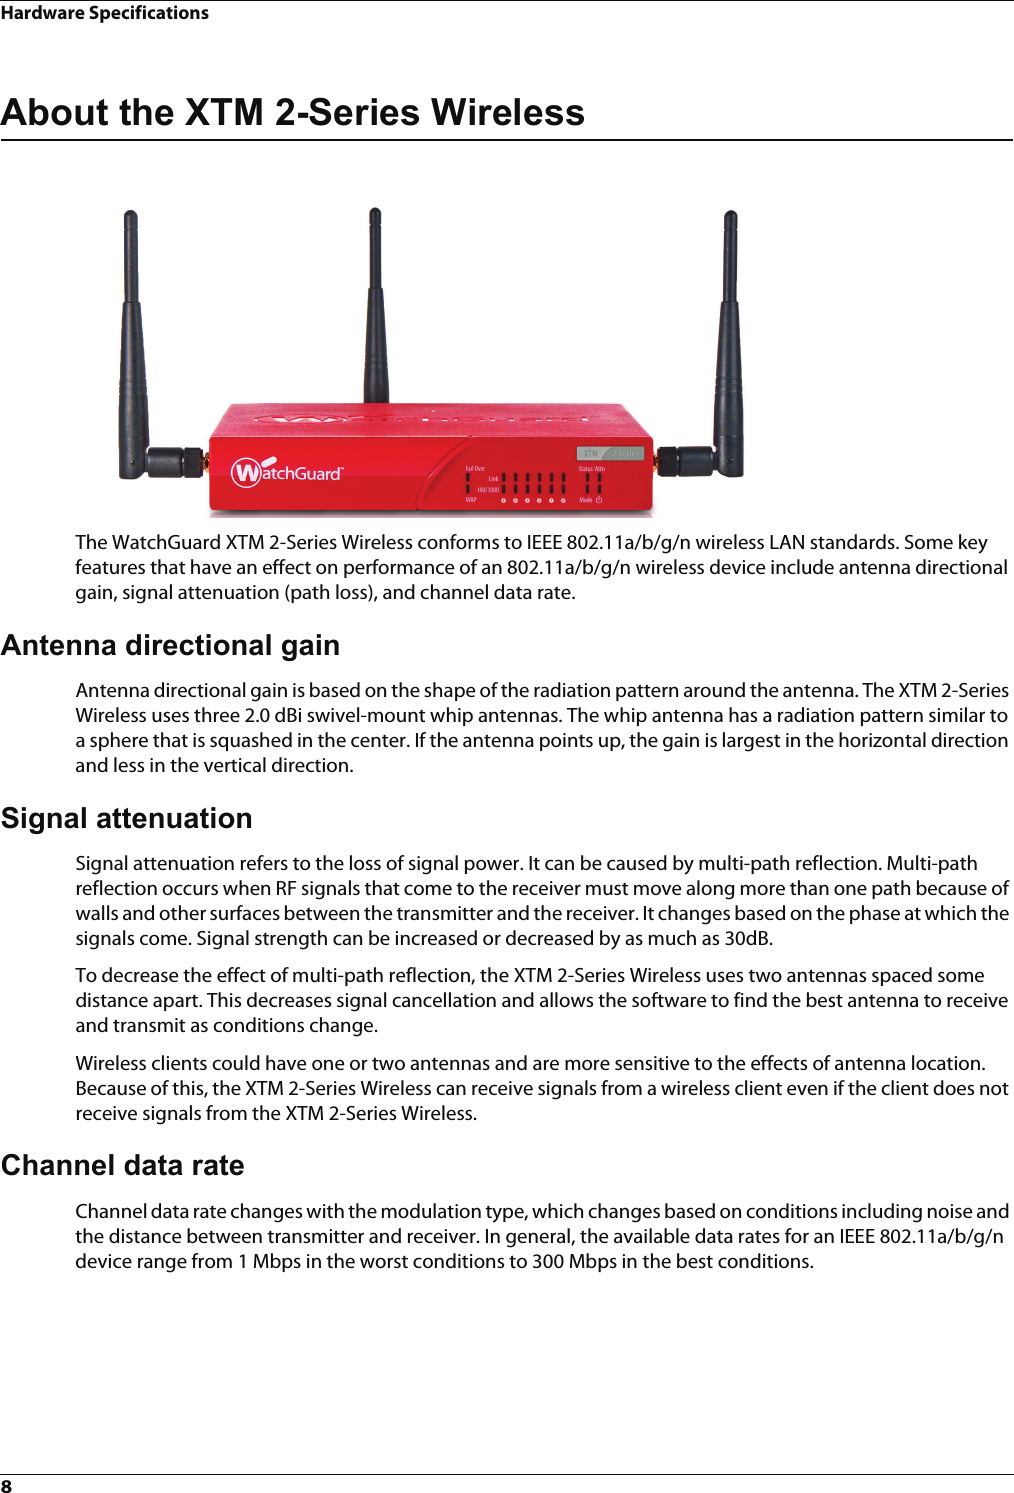 Hardware Specifications8About the XTM 2-Series WirelessThe WatchGuard XTM 2-Series Wireless conforms to IEEE 802.11a/b/g/n wireless LAN standards. Some key features that have an effect on performance of an 802.11a/b/g/n wireless device include antenna directional gain, signal attenuation (path loss), and channel data rate. Antenna directional gainAntenna directional gain is based on the shape of the radiation pattern around the antenna. The XTM 2-Series Wireless uses three 2.0 dBi swivel-mount whip antennas. The whip antenna has a radiation pattern similar to a sphere that is squashed in the center. If the antenna points up, the gain is largest in the horizontal direction and less in the vertical direction.Signal attenuationSignal attenuation refers to the loss of signal power. It can be caused by multi-path reflection. Multi-path reflection occurs when RF signals that come to the receiver must move along more than one path because of walls and other surfaces between the transmitter and the receiver. It changes based on the phase at which the signals come. Signal strength can be increased or decreased by as much as 30dB. To decrease the effect of multi-path reflection, the XTM 2-Series Wireless uses two antennas spaced some distance apart. This decreases signal cancellation and allows the software to find the best antenna to receive and transmit as conditions change. Wireless clients could have one or two antennas and are more sensitive to the effects of antenna location. Because of this, the XTM 2-Series Wireless can receive signals from a wireless client even if the client does not receive signals from the XTM 2-Series Wireless.Channel data rateChannel data rate changes with the modulation type, which changes based on conditions including noise and the distance between transmitter and receiver. In general, the available data rates for an IEEE 802.11a/b/g/n device range from 1 Mbps in the worst conditions to 300 Mbps in the best conditions.